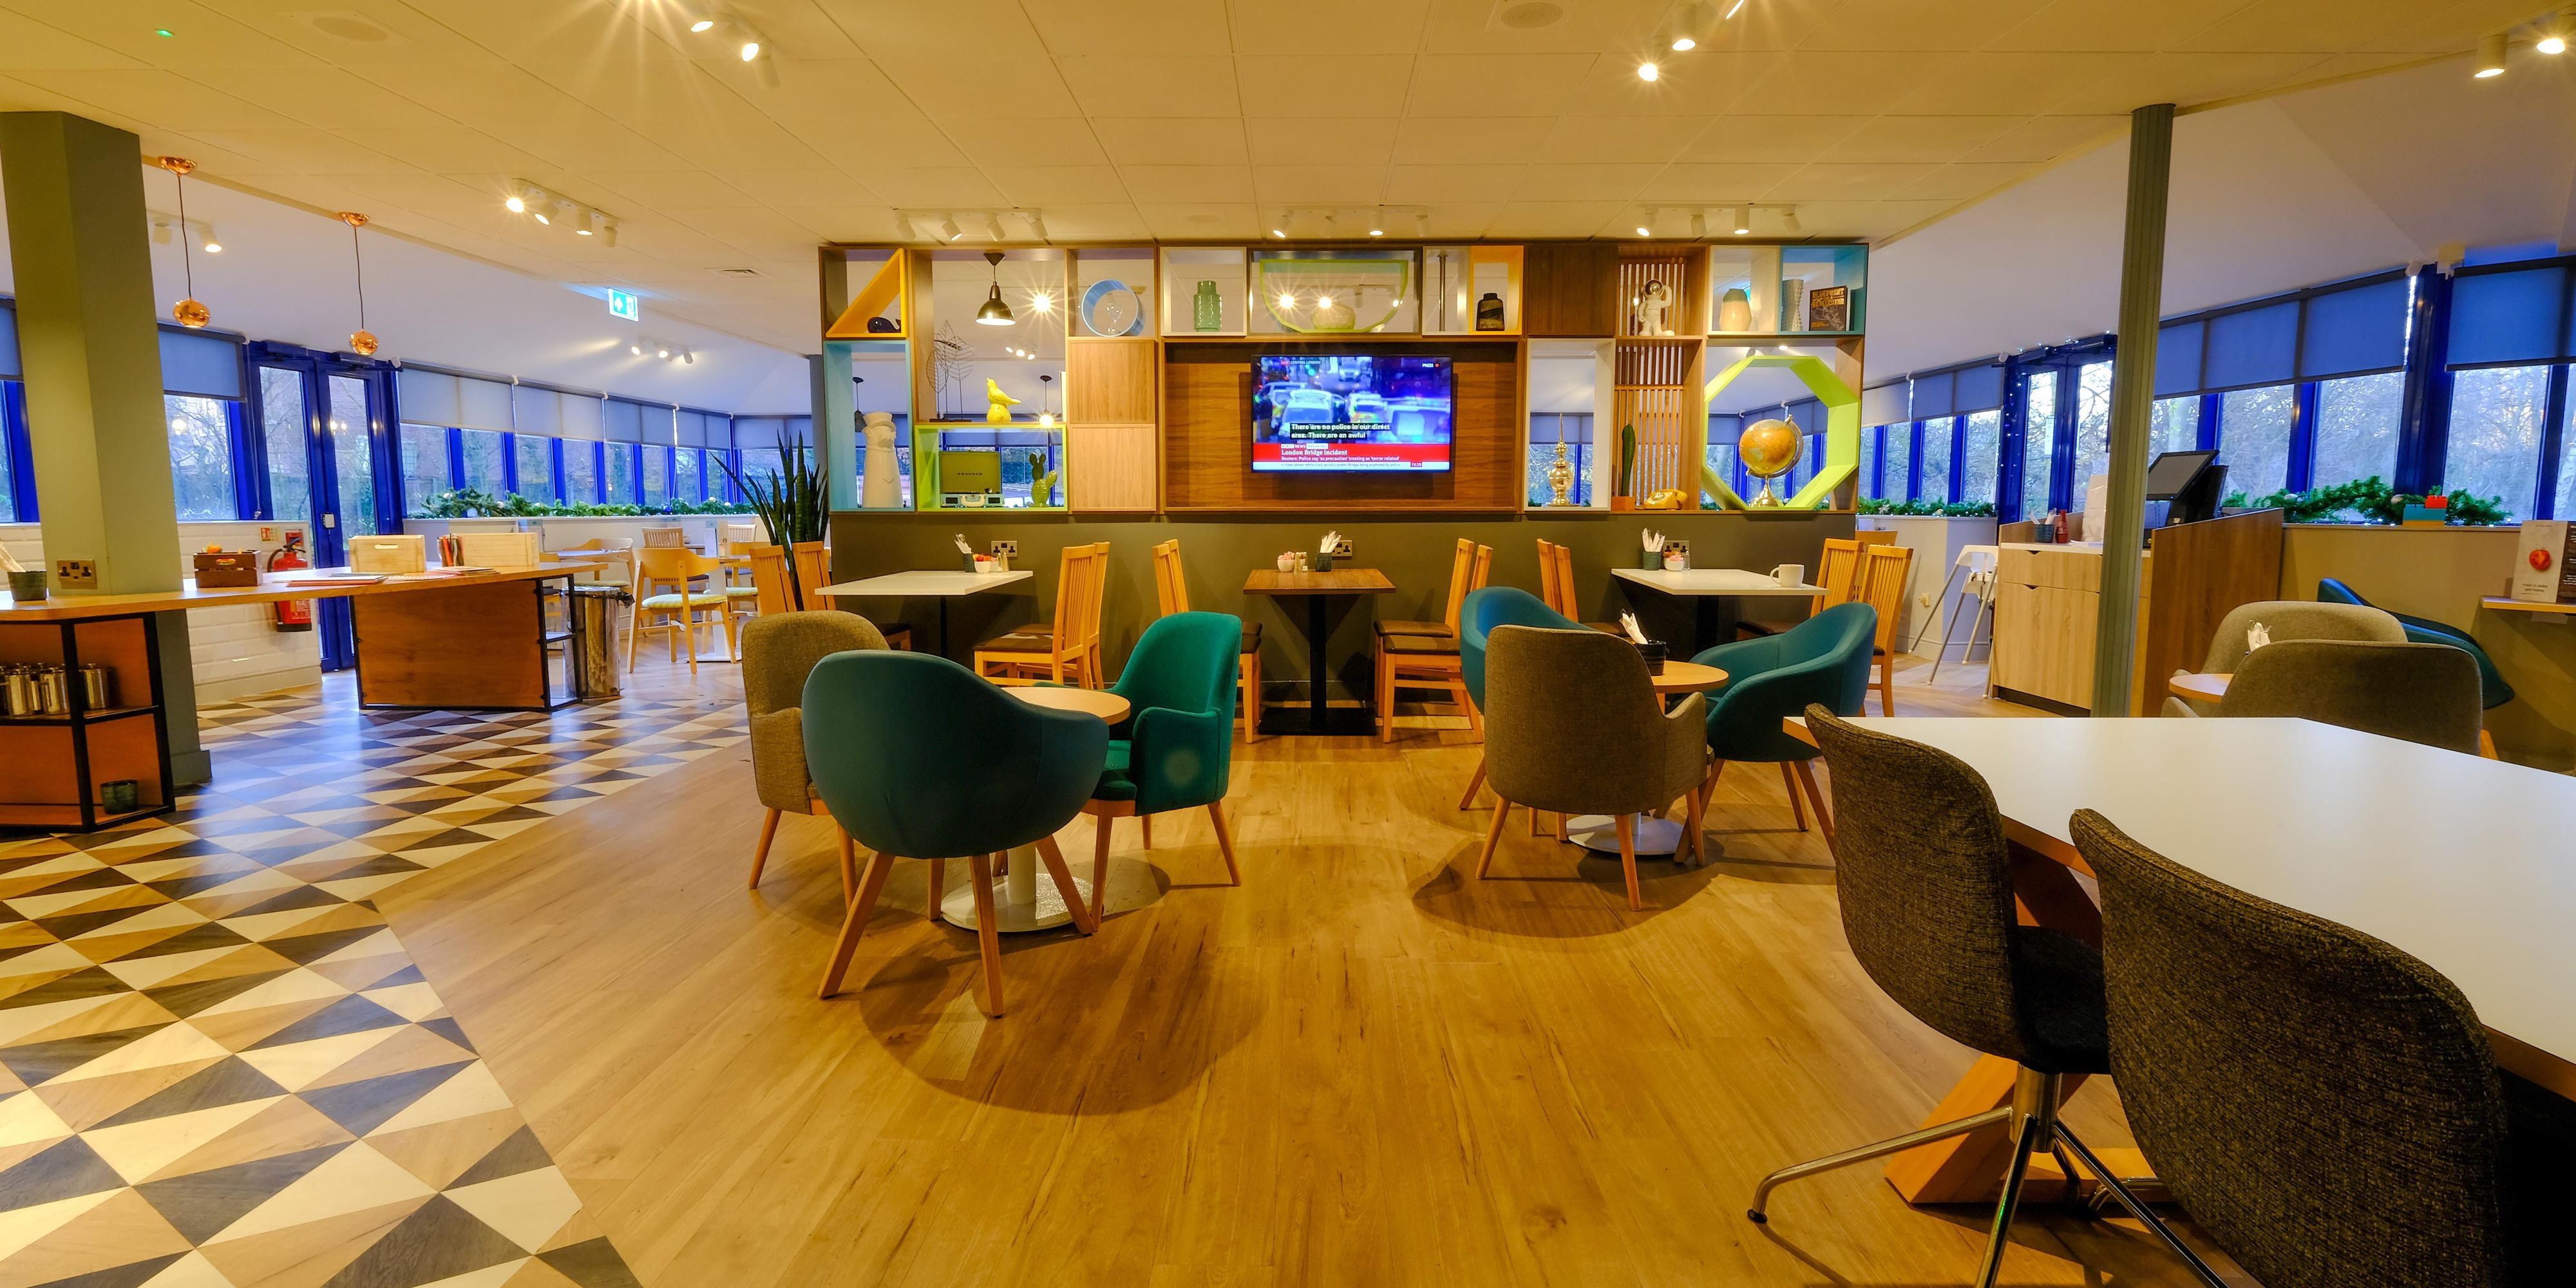 A vibrant space to tuck into breakfast or enjoy an evening meal.